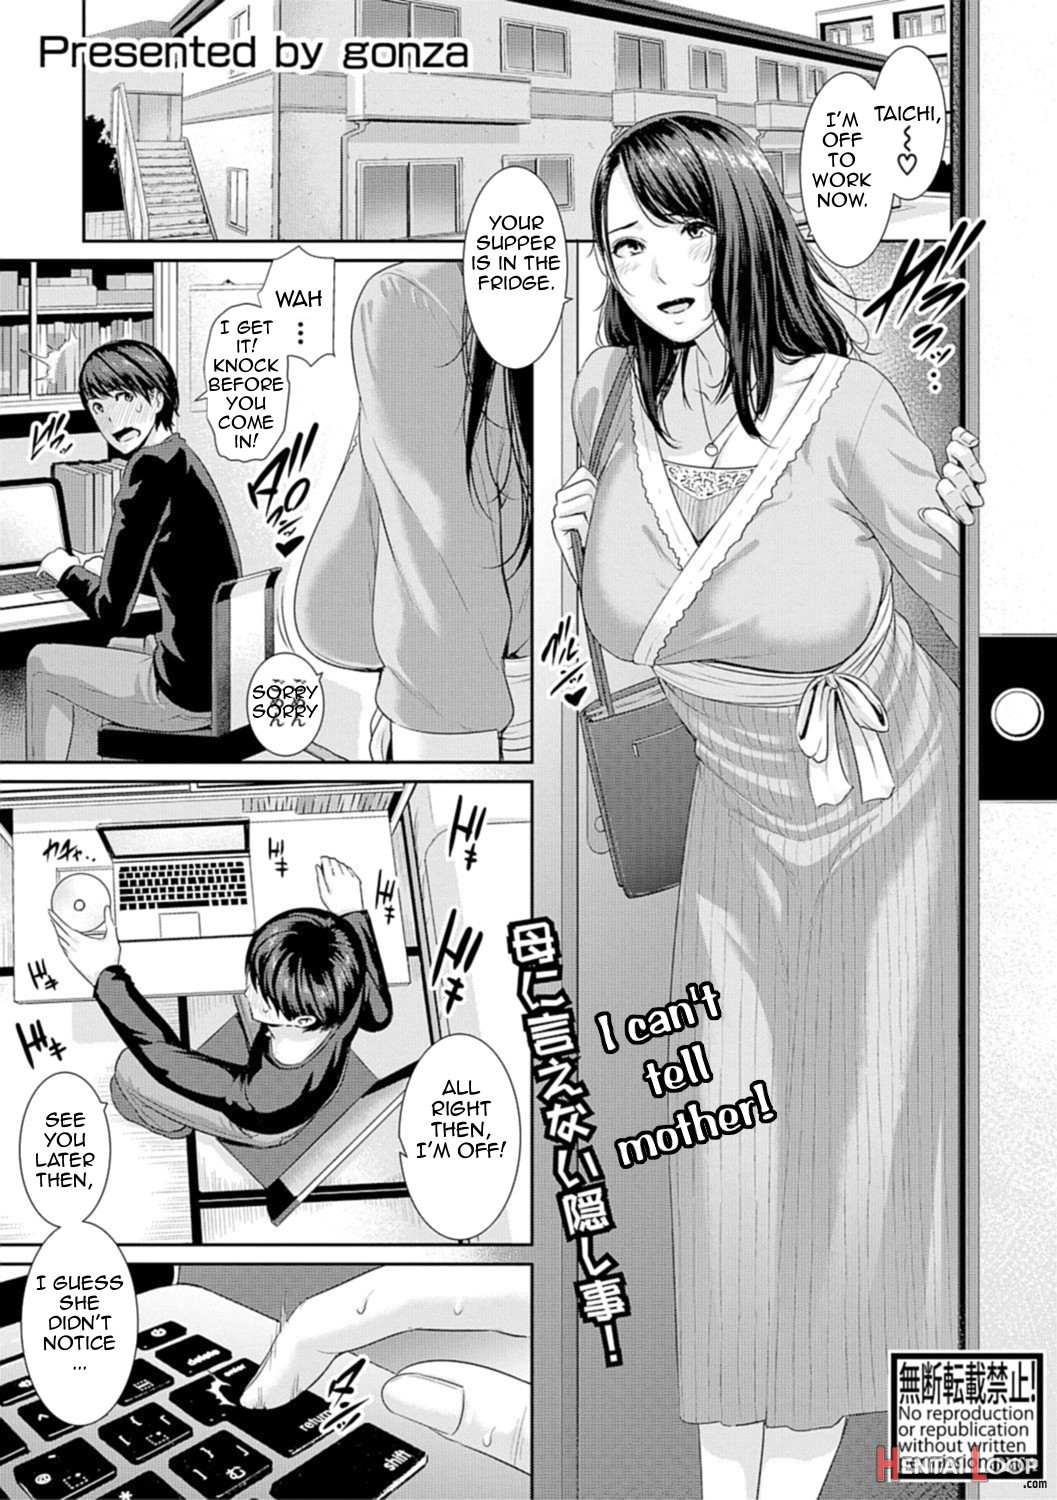 Mother Is A Porn Star (by Gonza) - Hentai doujinshi for free at HentaiLoop